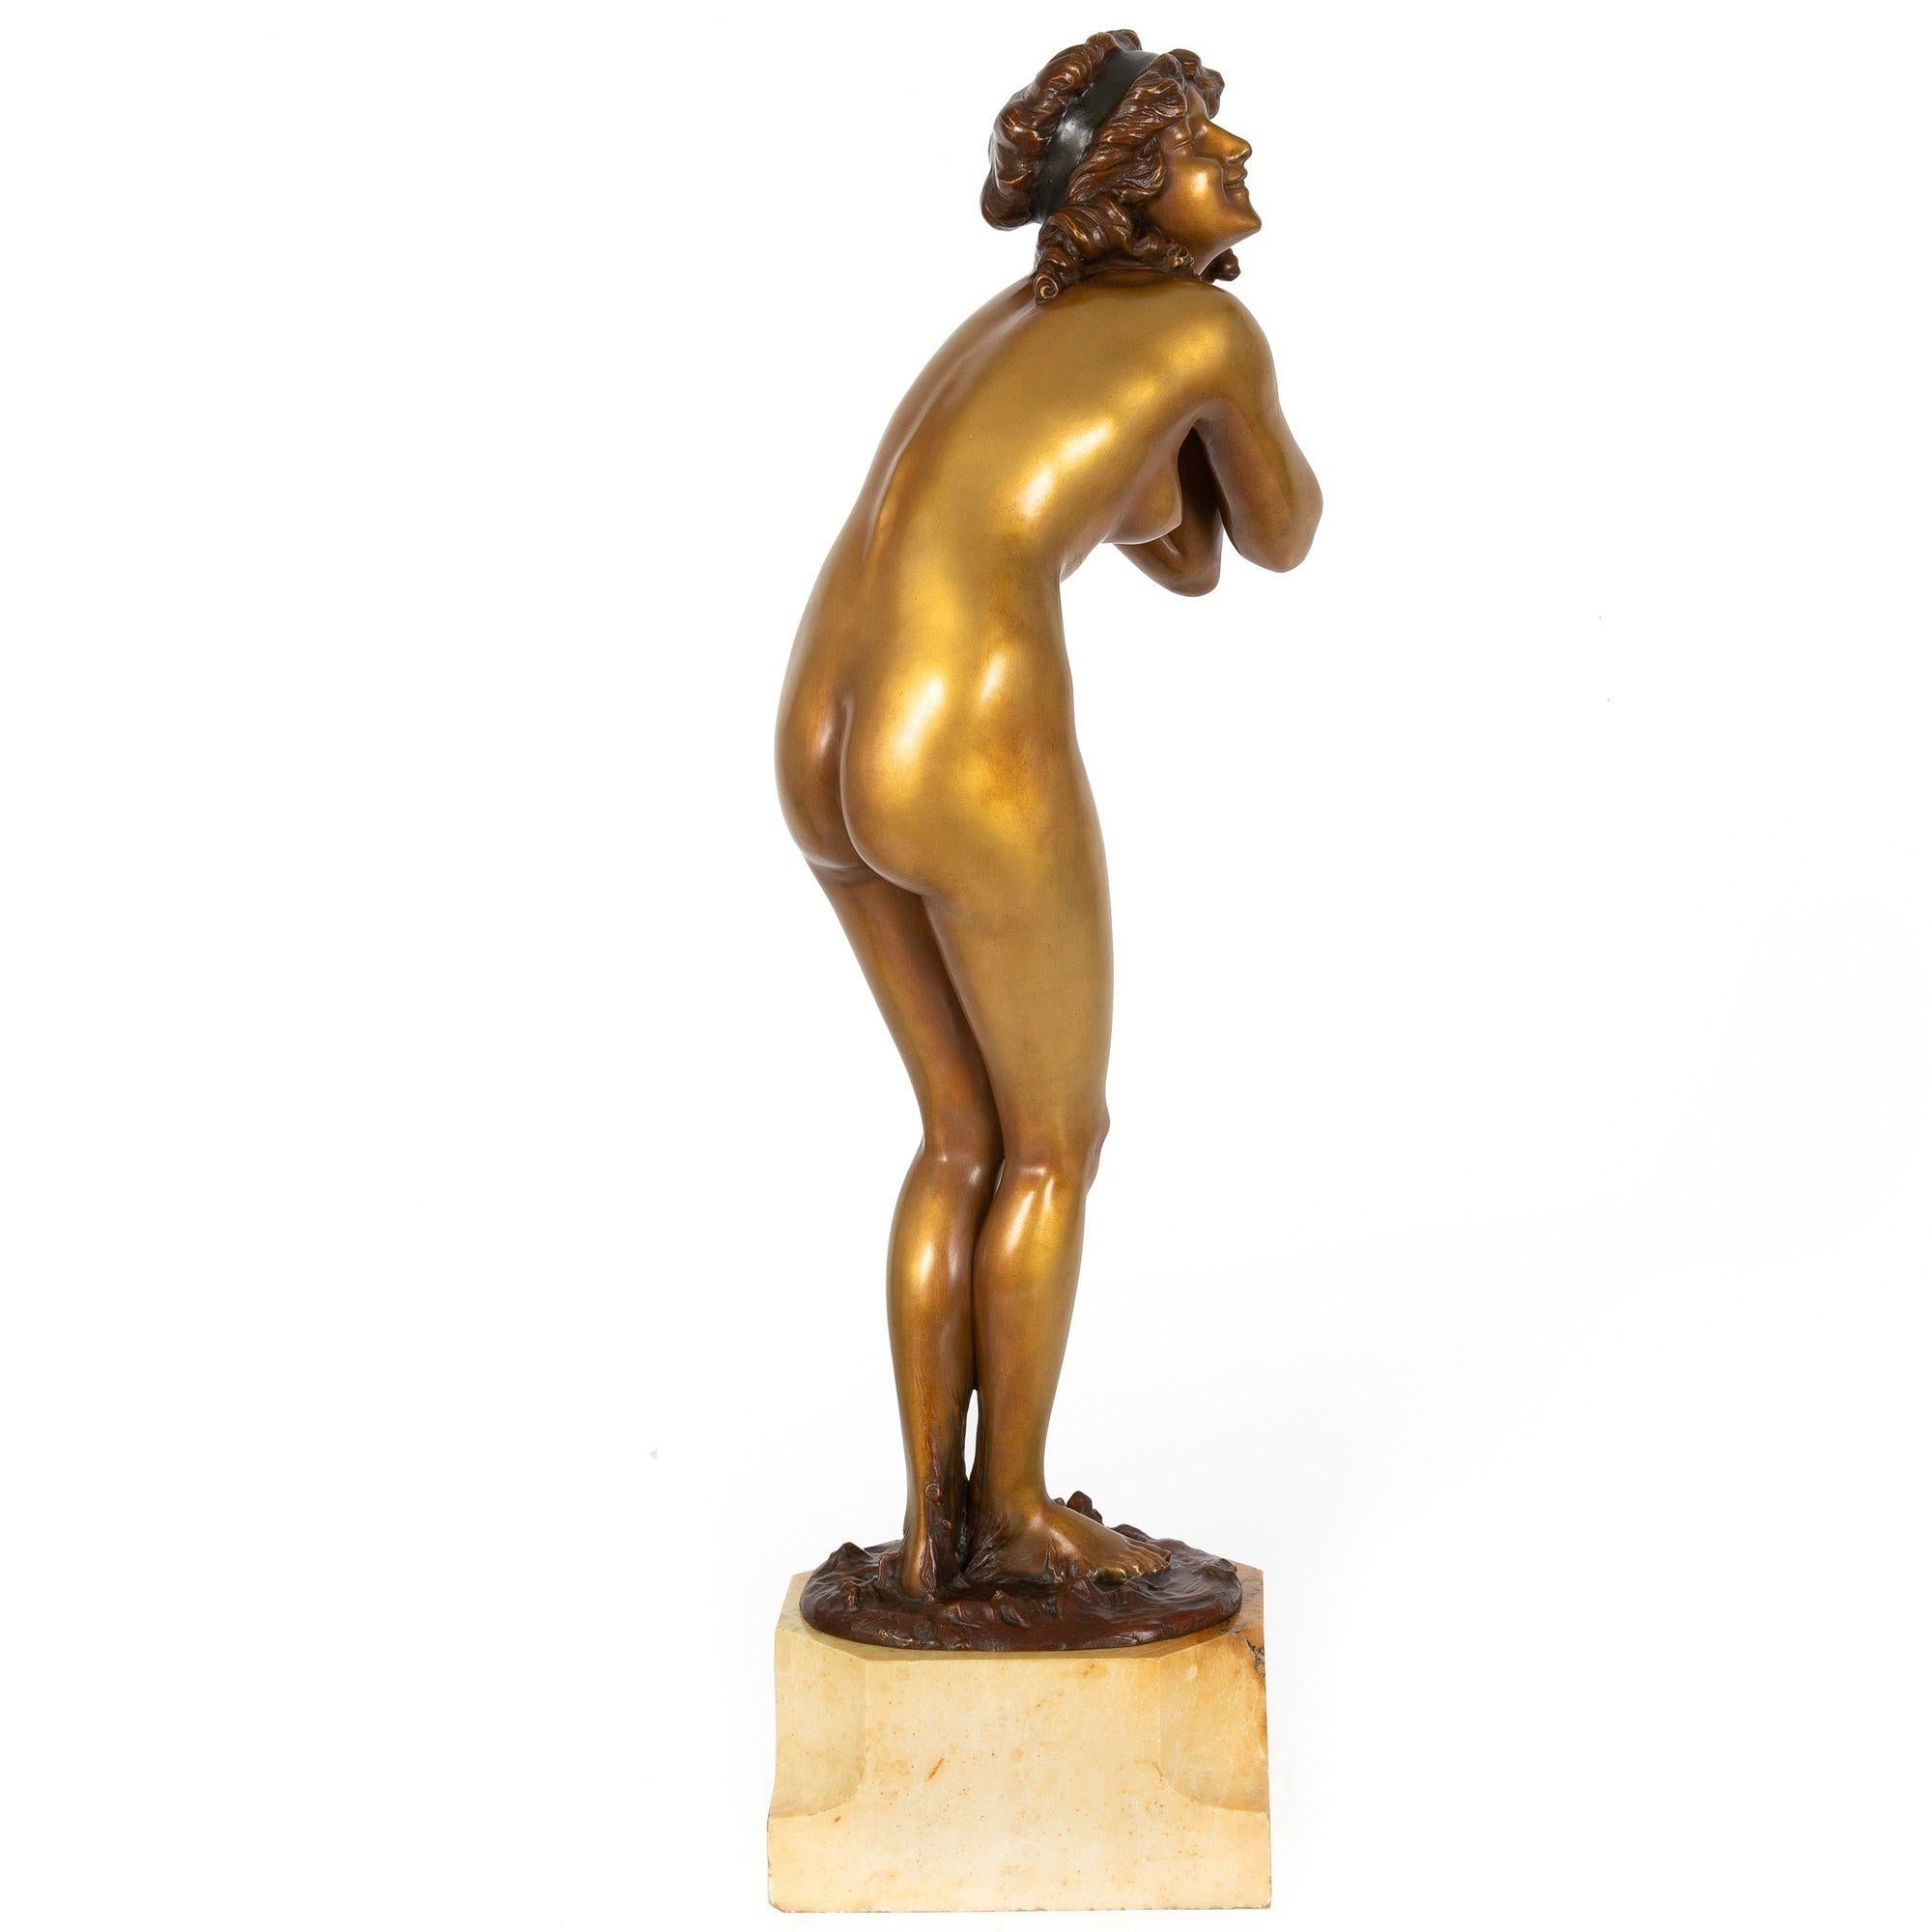 French Rare Art Deco Bronze Sculpture “Mischievous” by Paul Philippe For Sale